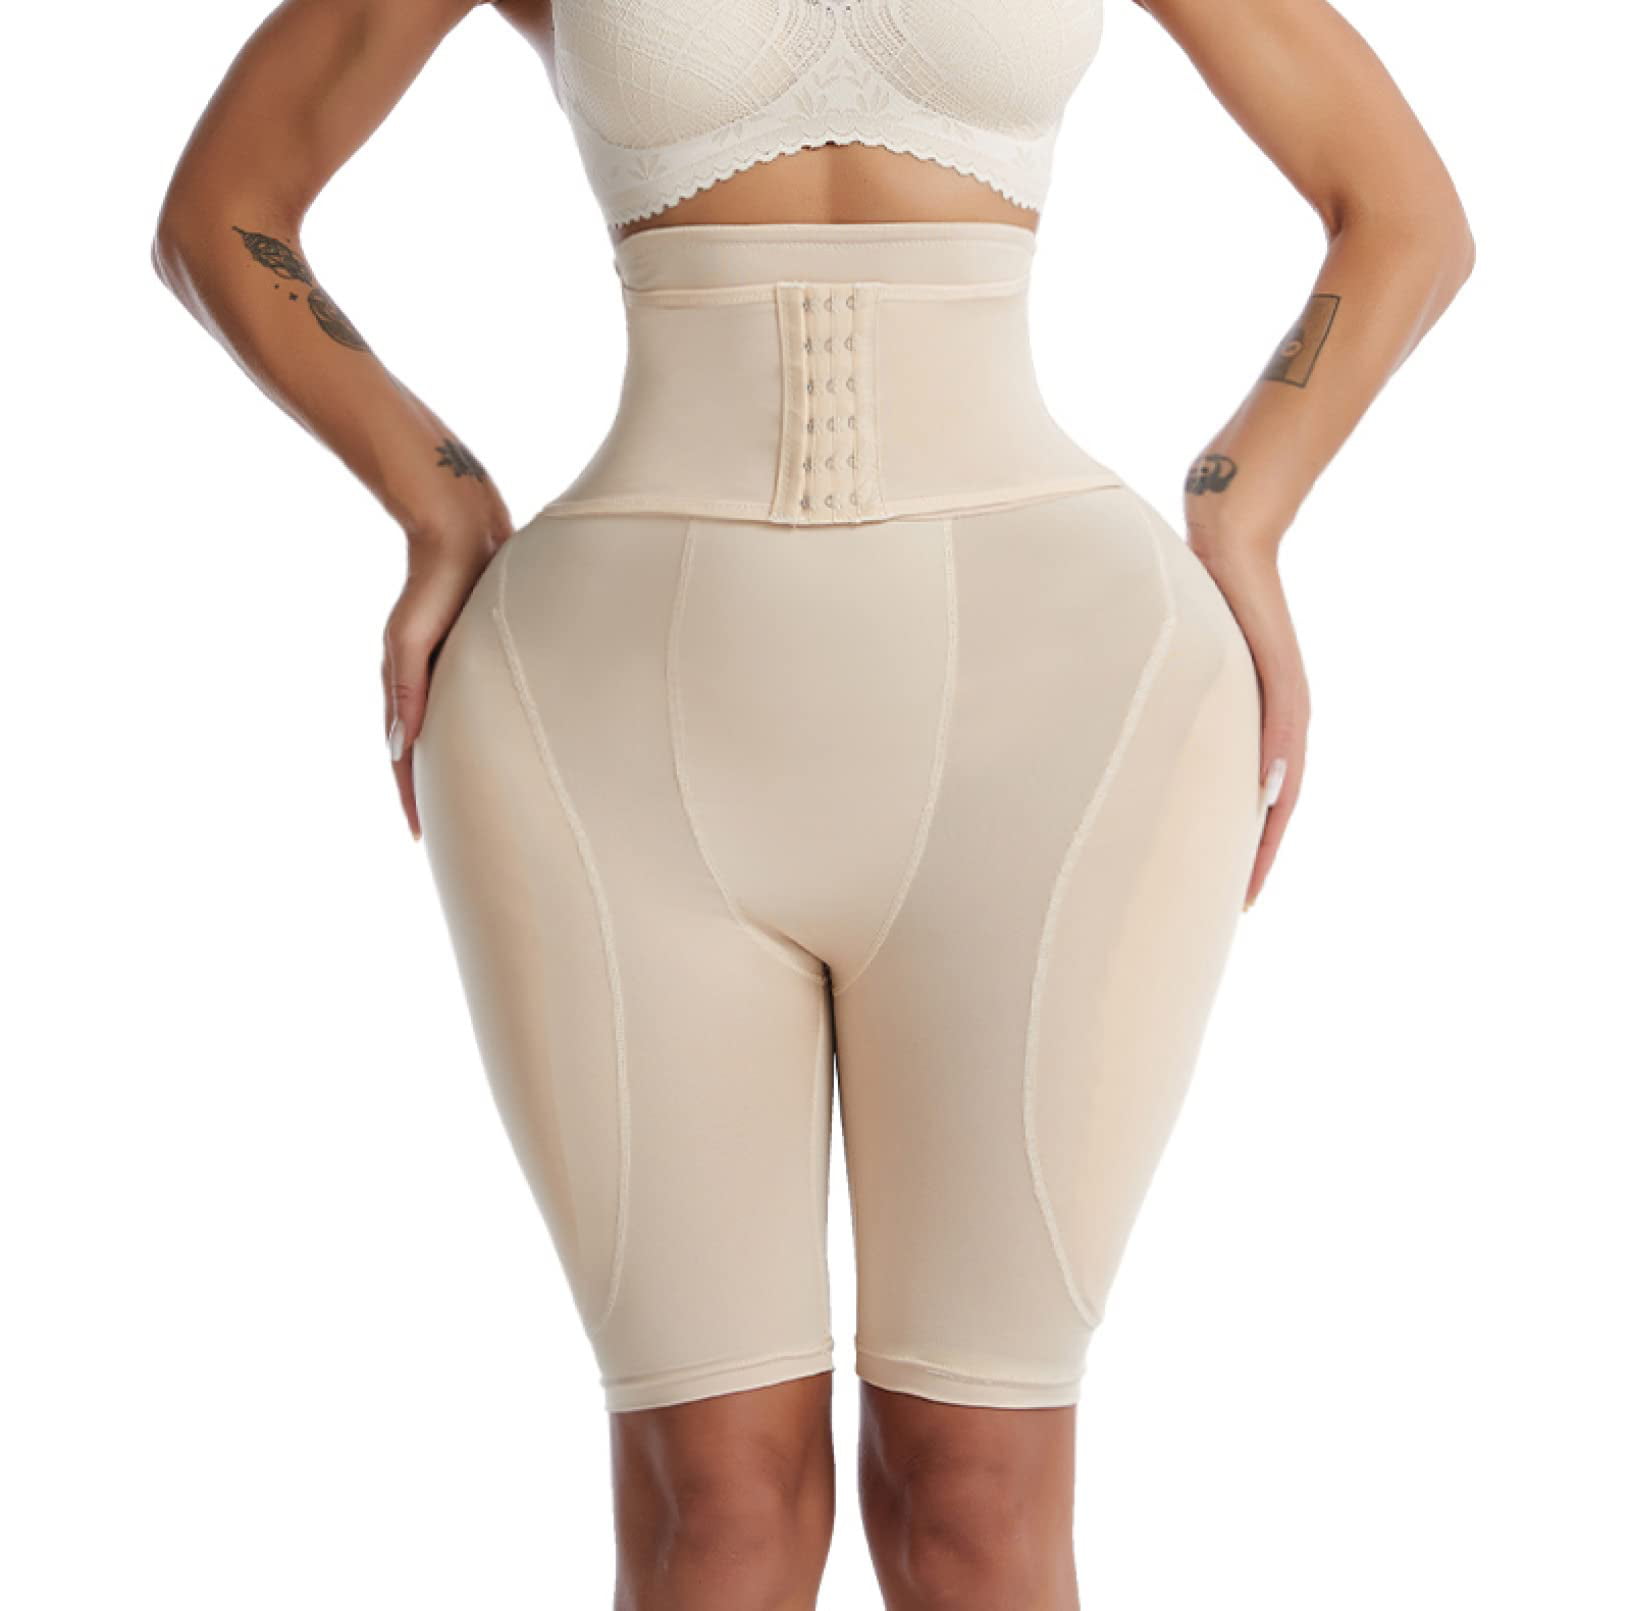 Womens Hourglass Big Shaper With Wrap Belt, Hip Dip Pads, Tummy Control,  And Padded Shorts Sexy Booty Shapewear For Tums From Huiguorou, $22.22